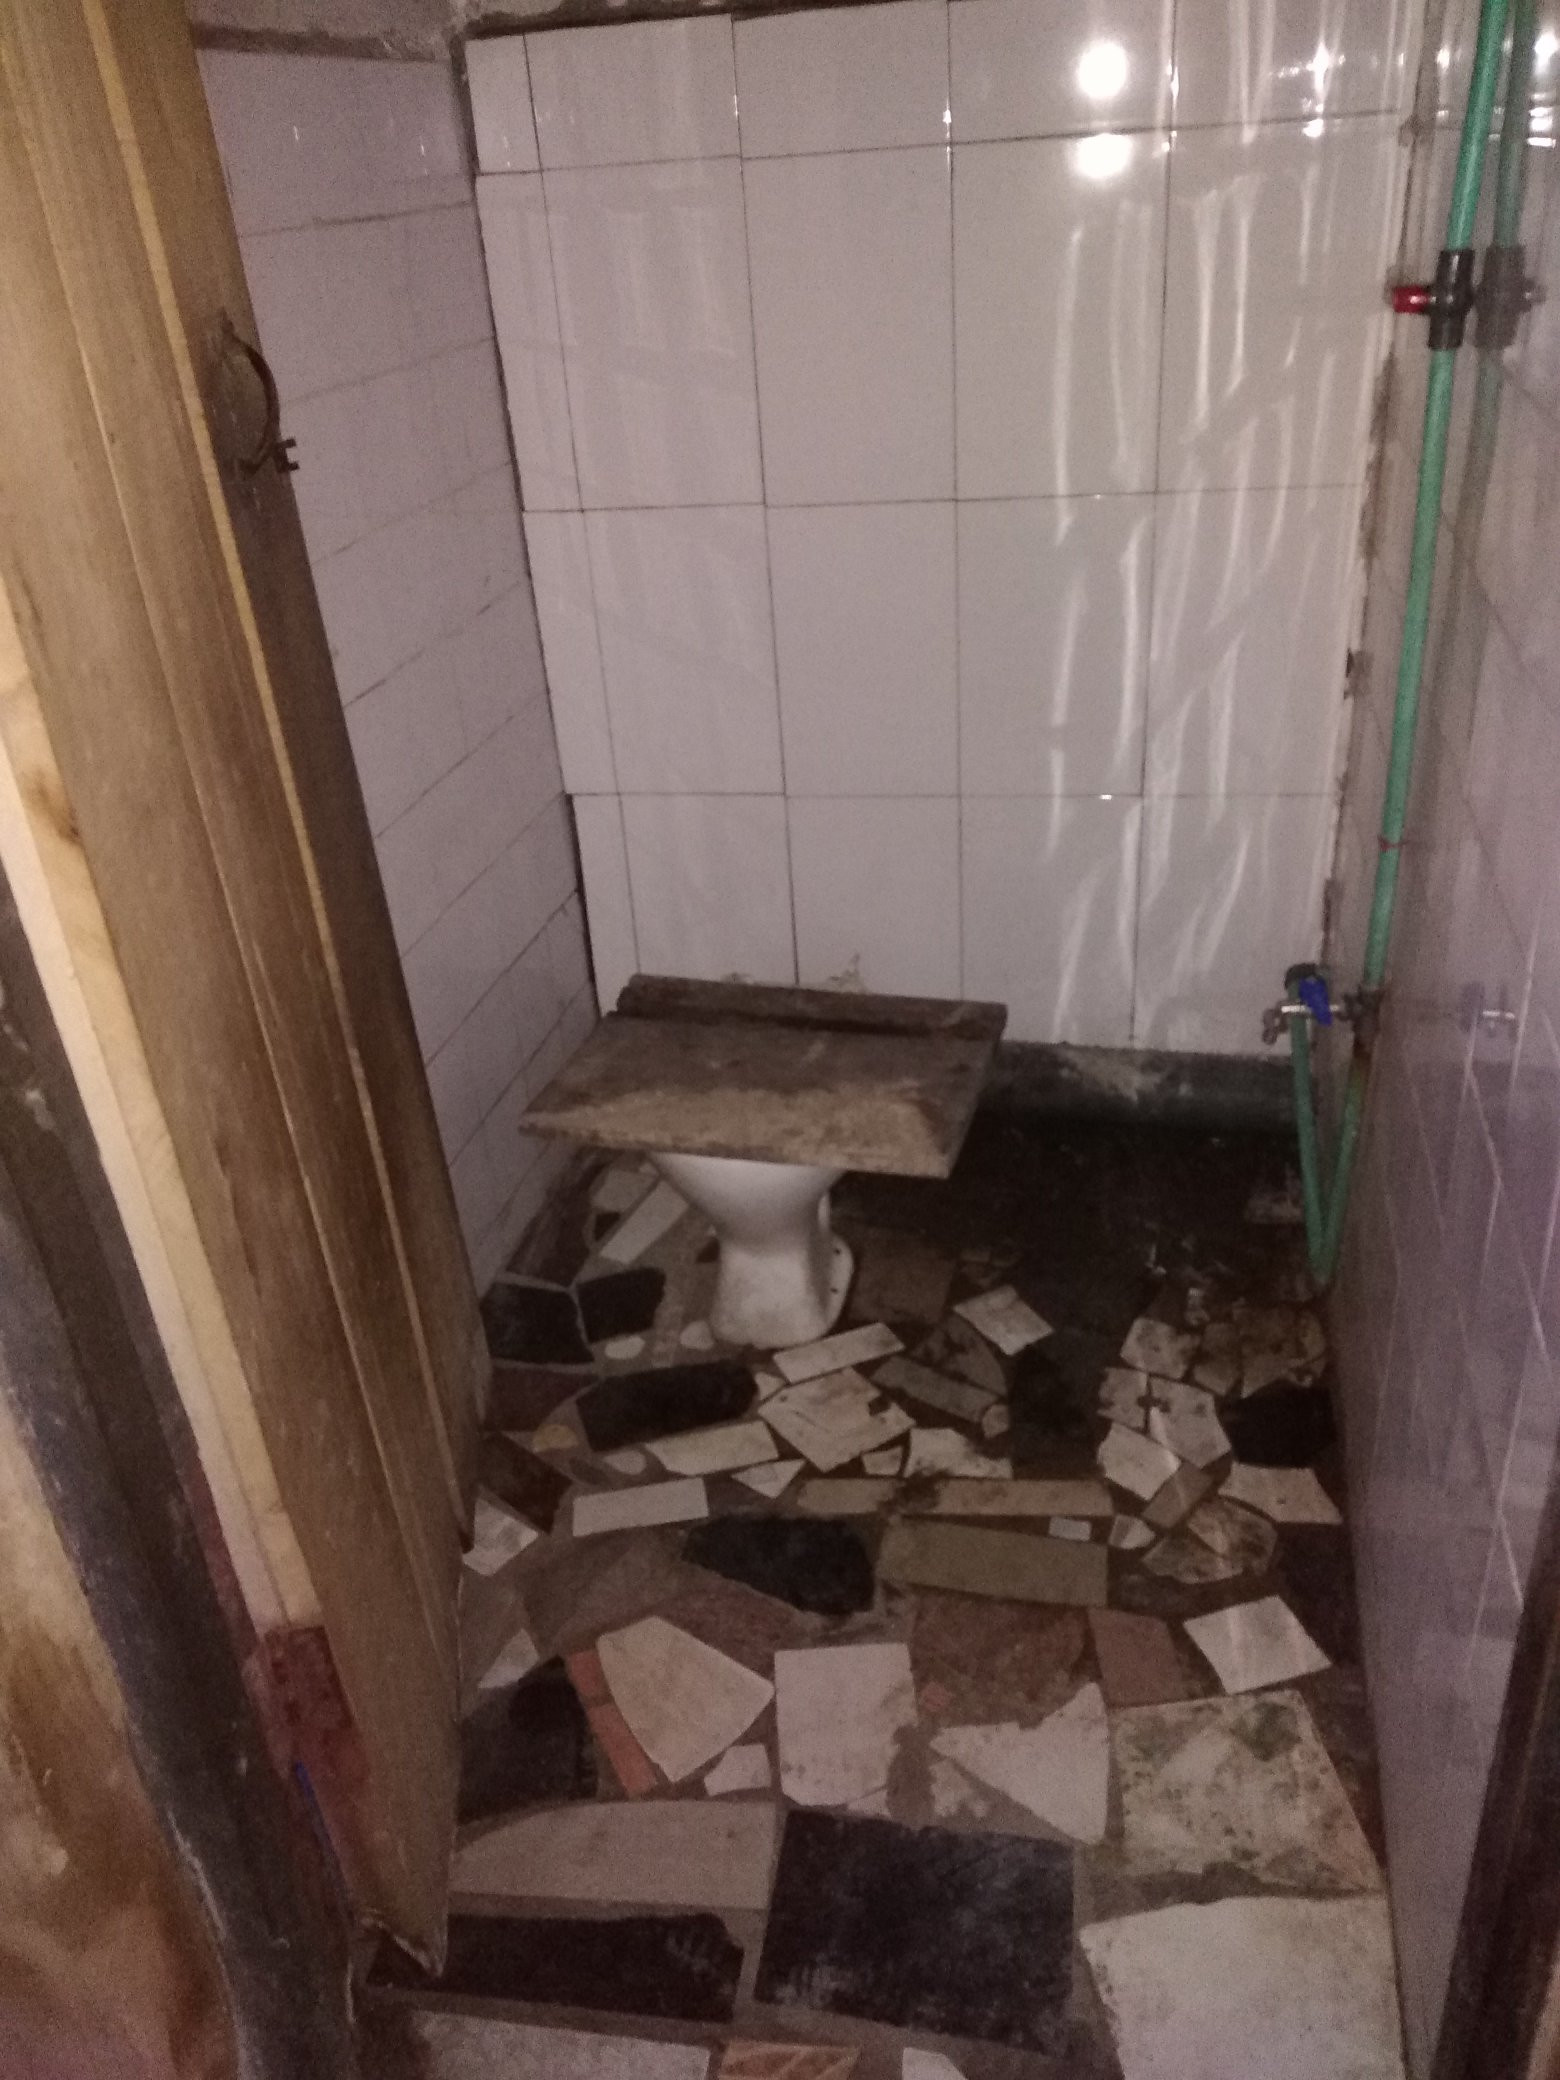 Nigerian lawyer shares photos to show the state of an apartment a landlord in Aguda is renting for 350,000